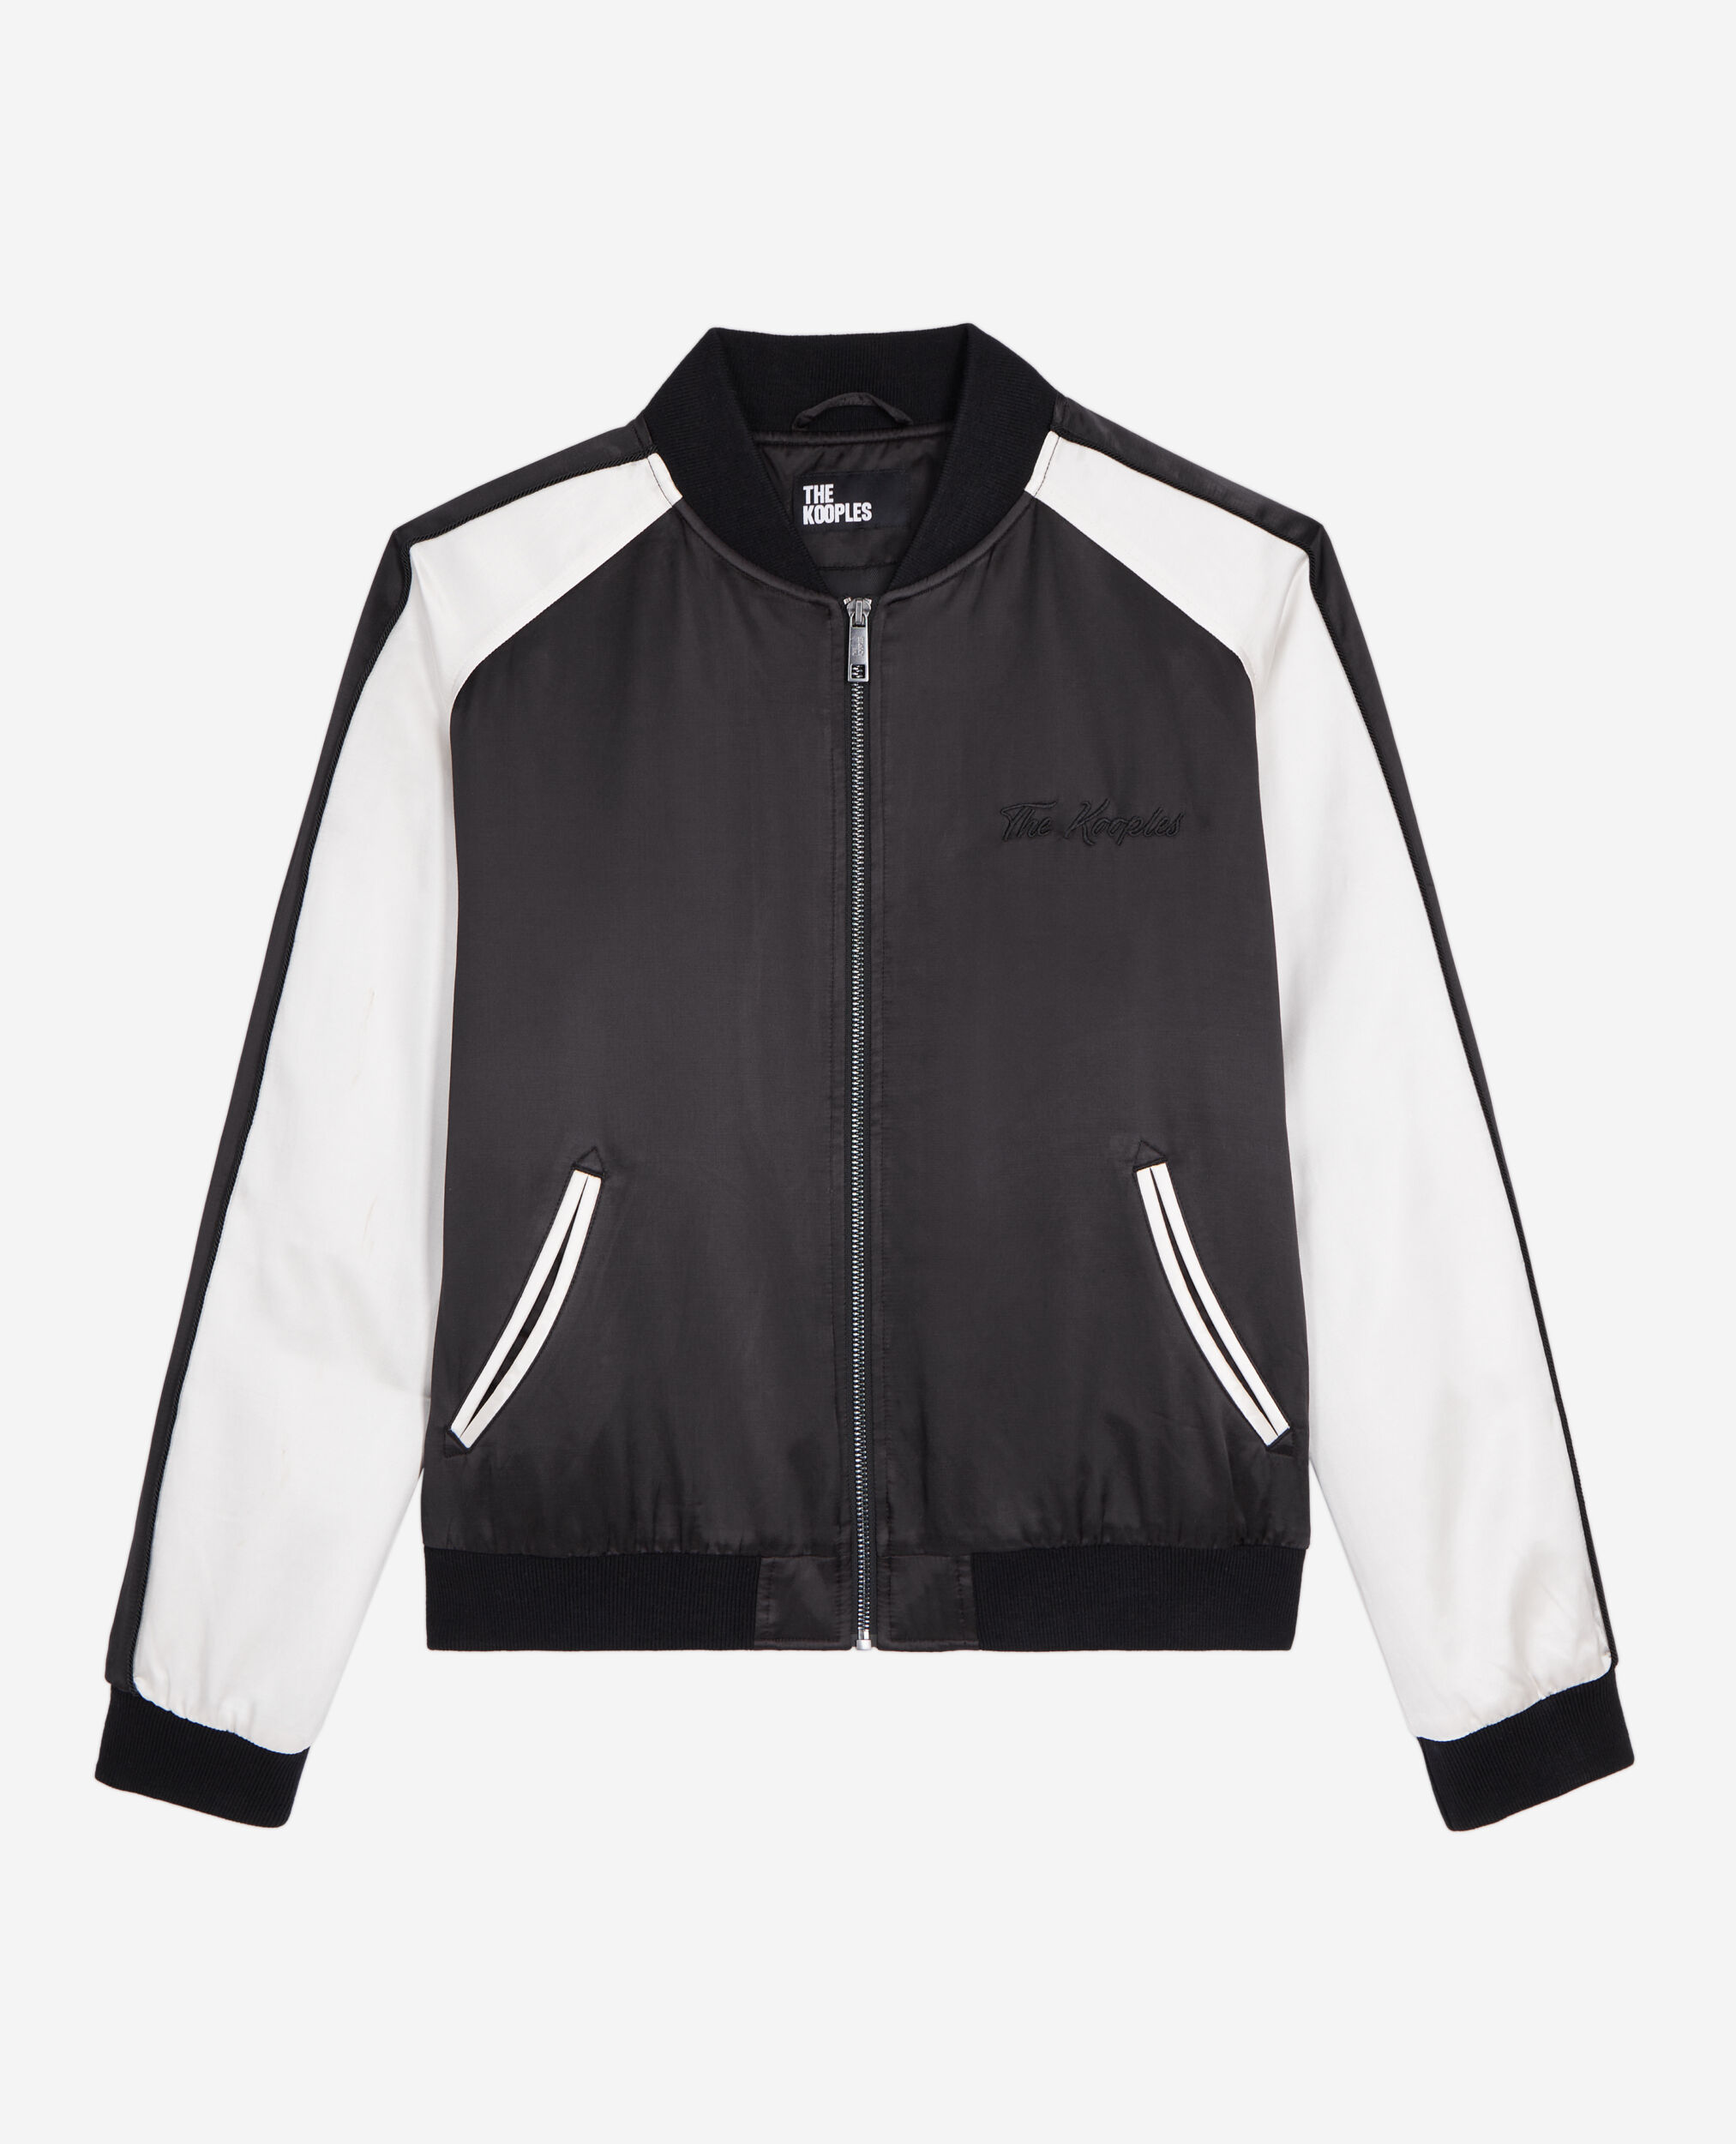 Black and white satin jacket with Dragon embroidery, BLACK, hi-res image number null